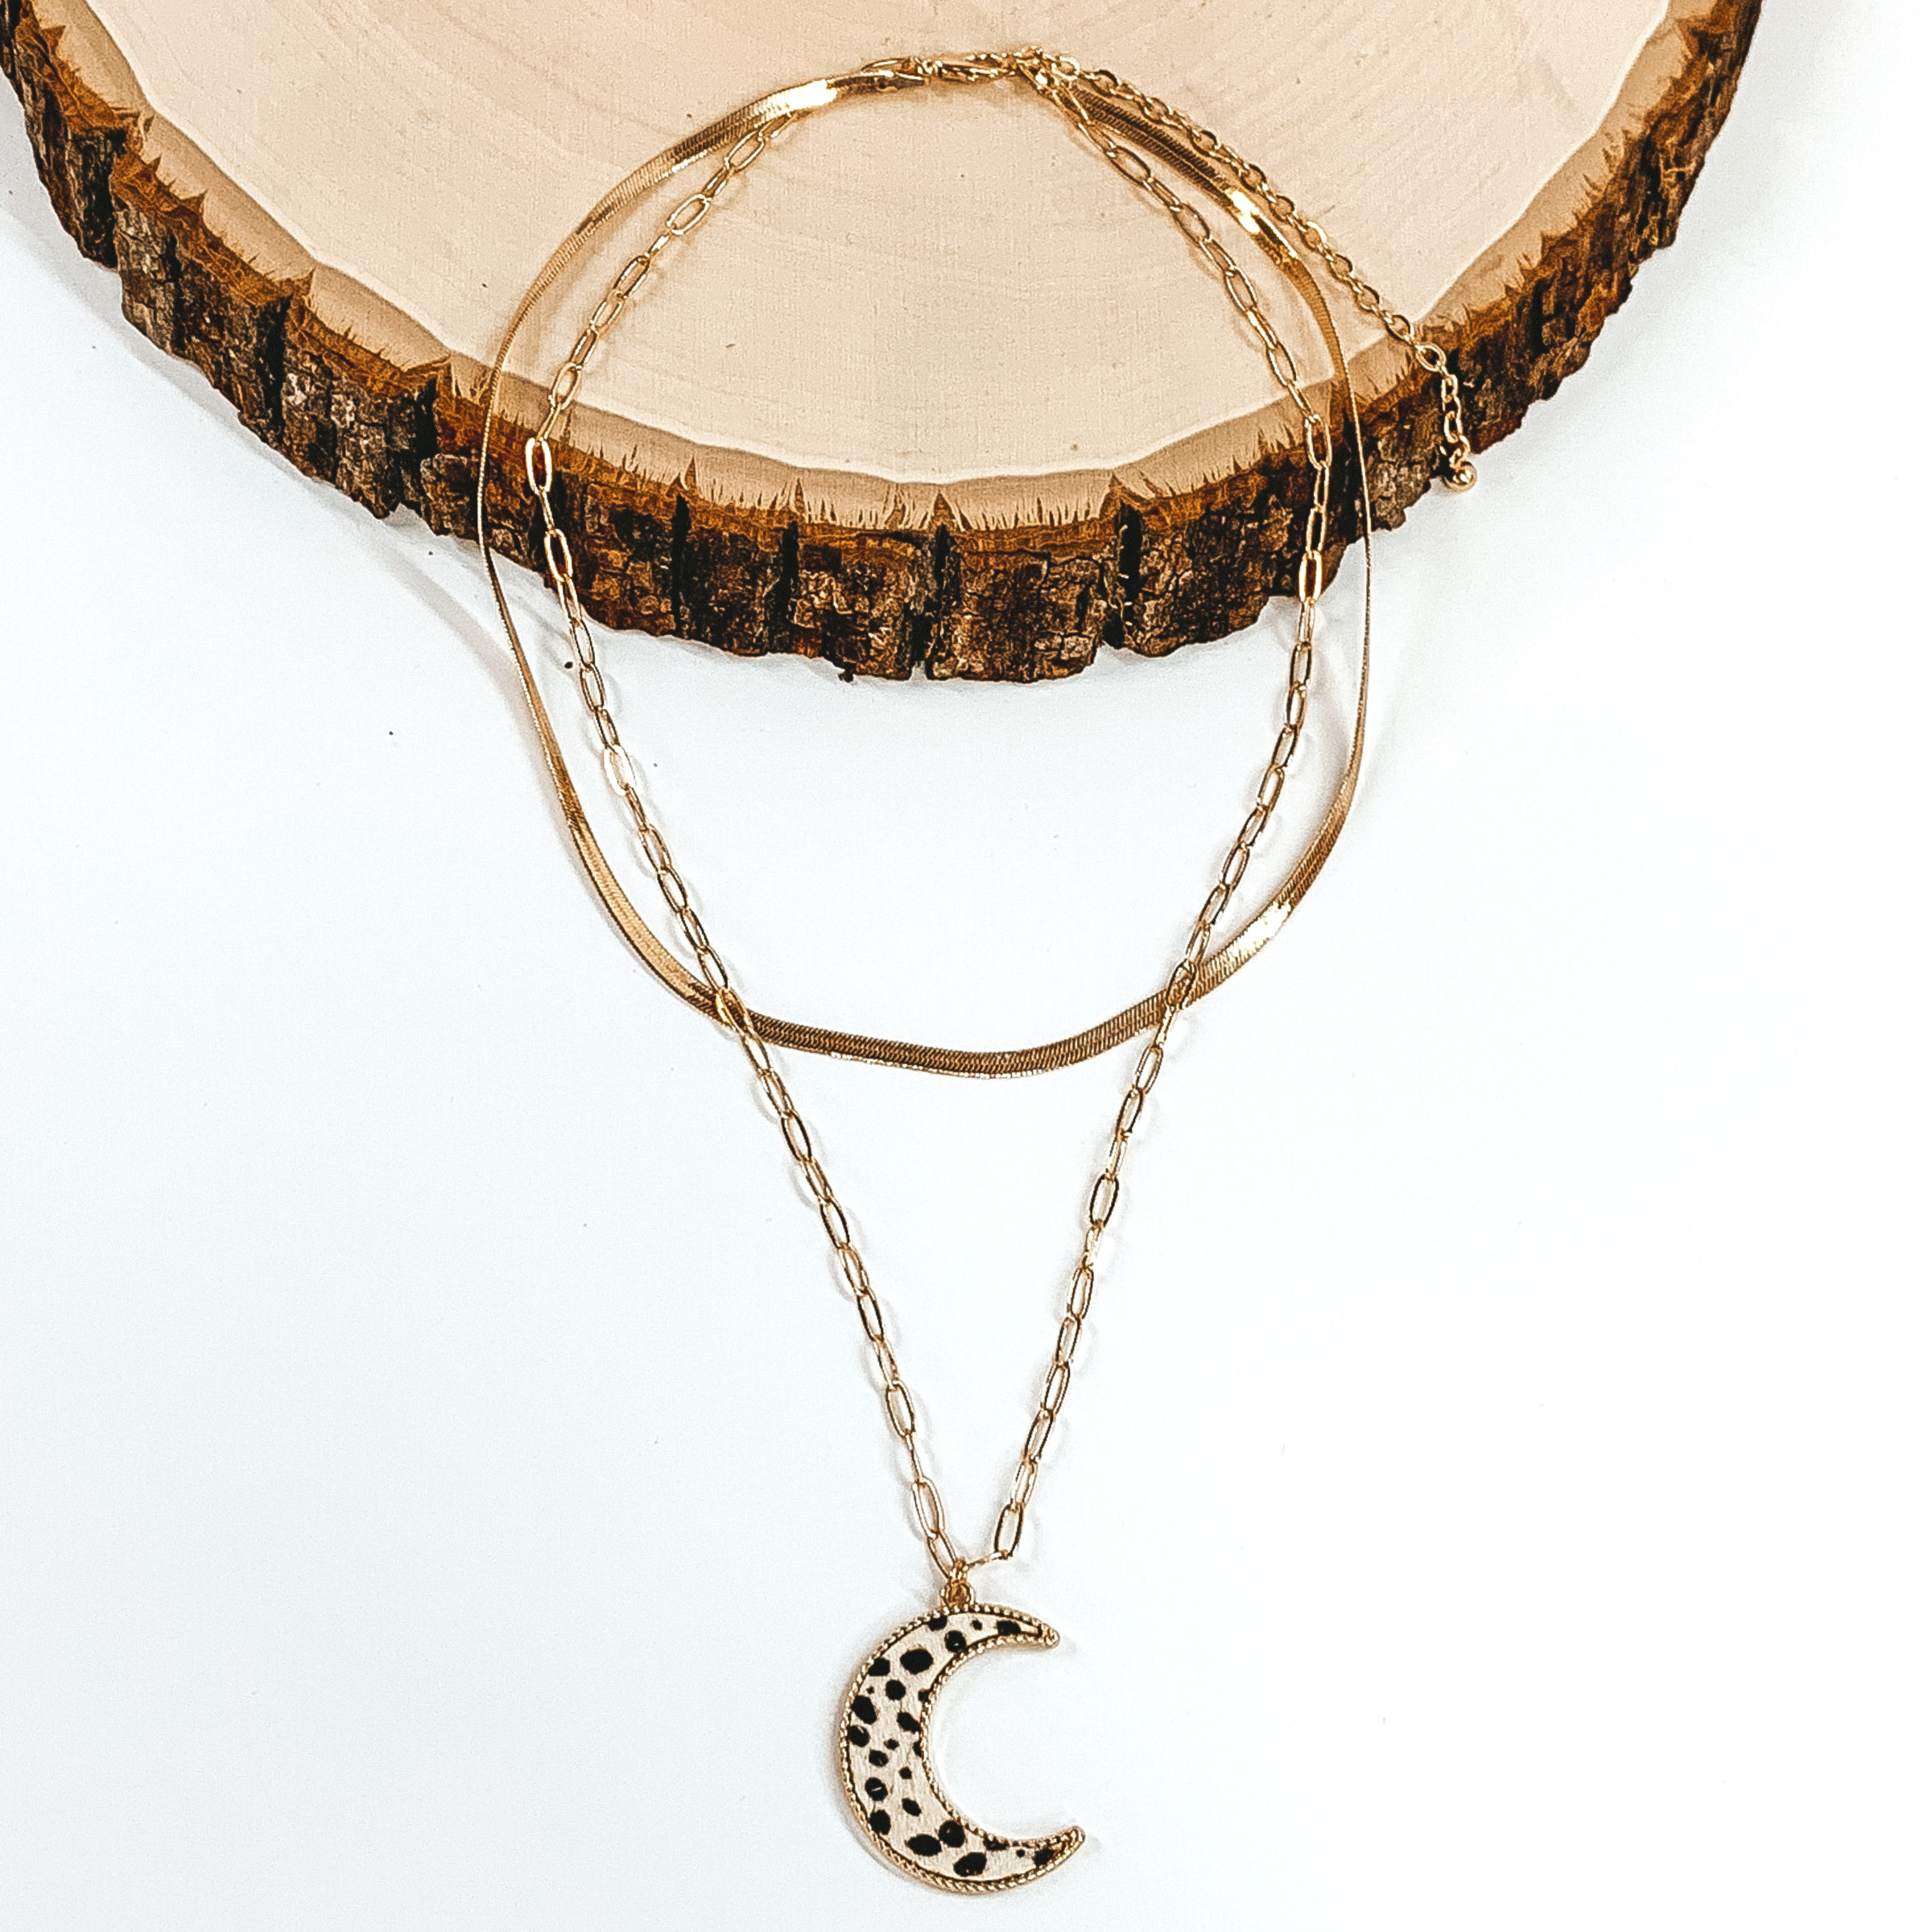 Gold paperclip doubled chain with an moon pendant. The pendant has a white hide inlay with a dotted print. This necklace is pictured laying on a piece of wood on a white background.